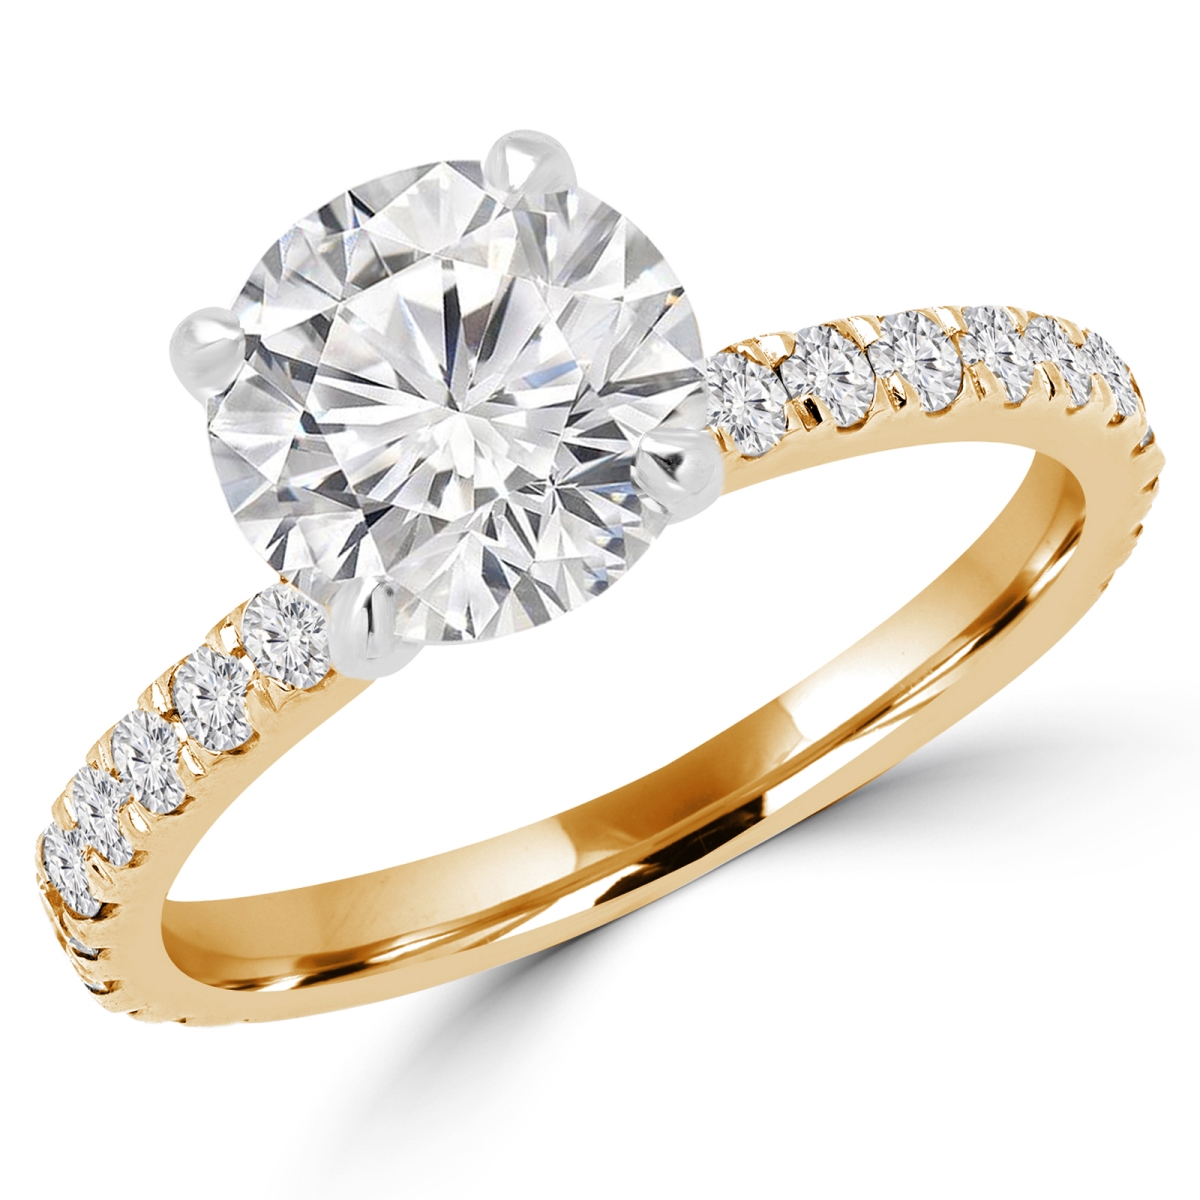 Picture of Majesty Diamonds MD160340-4.75 1 CTW Round Cut Diamond Multi Stone Engagement Ring in 14K Yellow Gold - Size 4.75